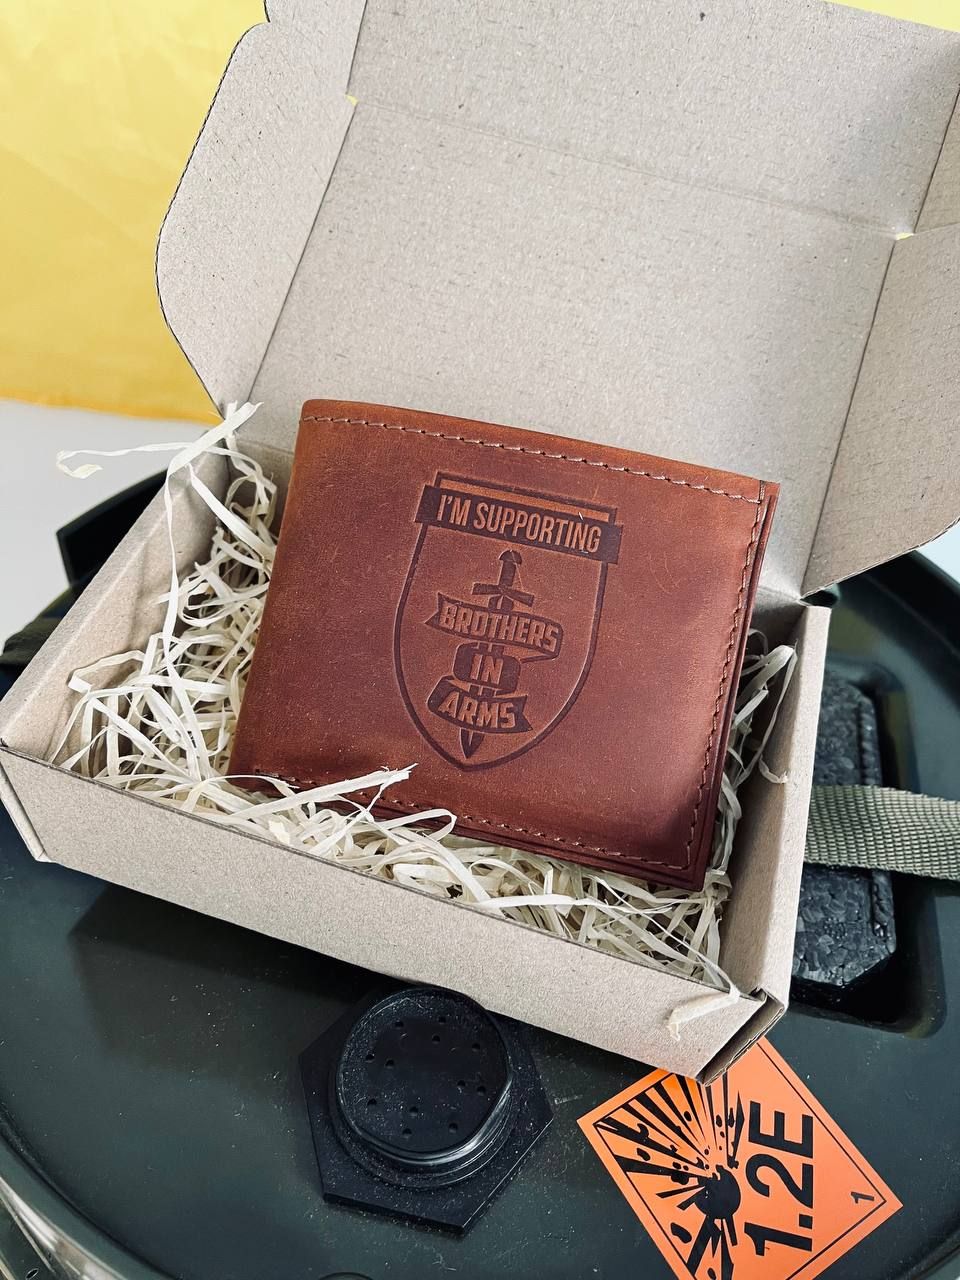 Leather  Wallet. I’m supporting Brothers in arms.